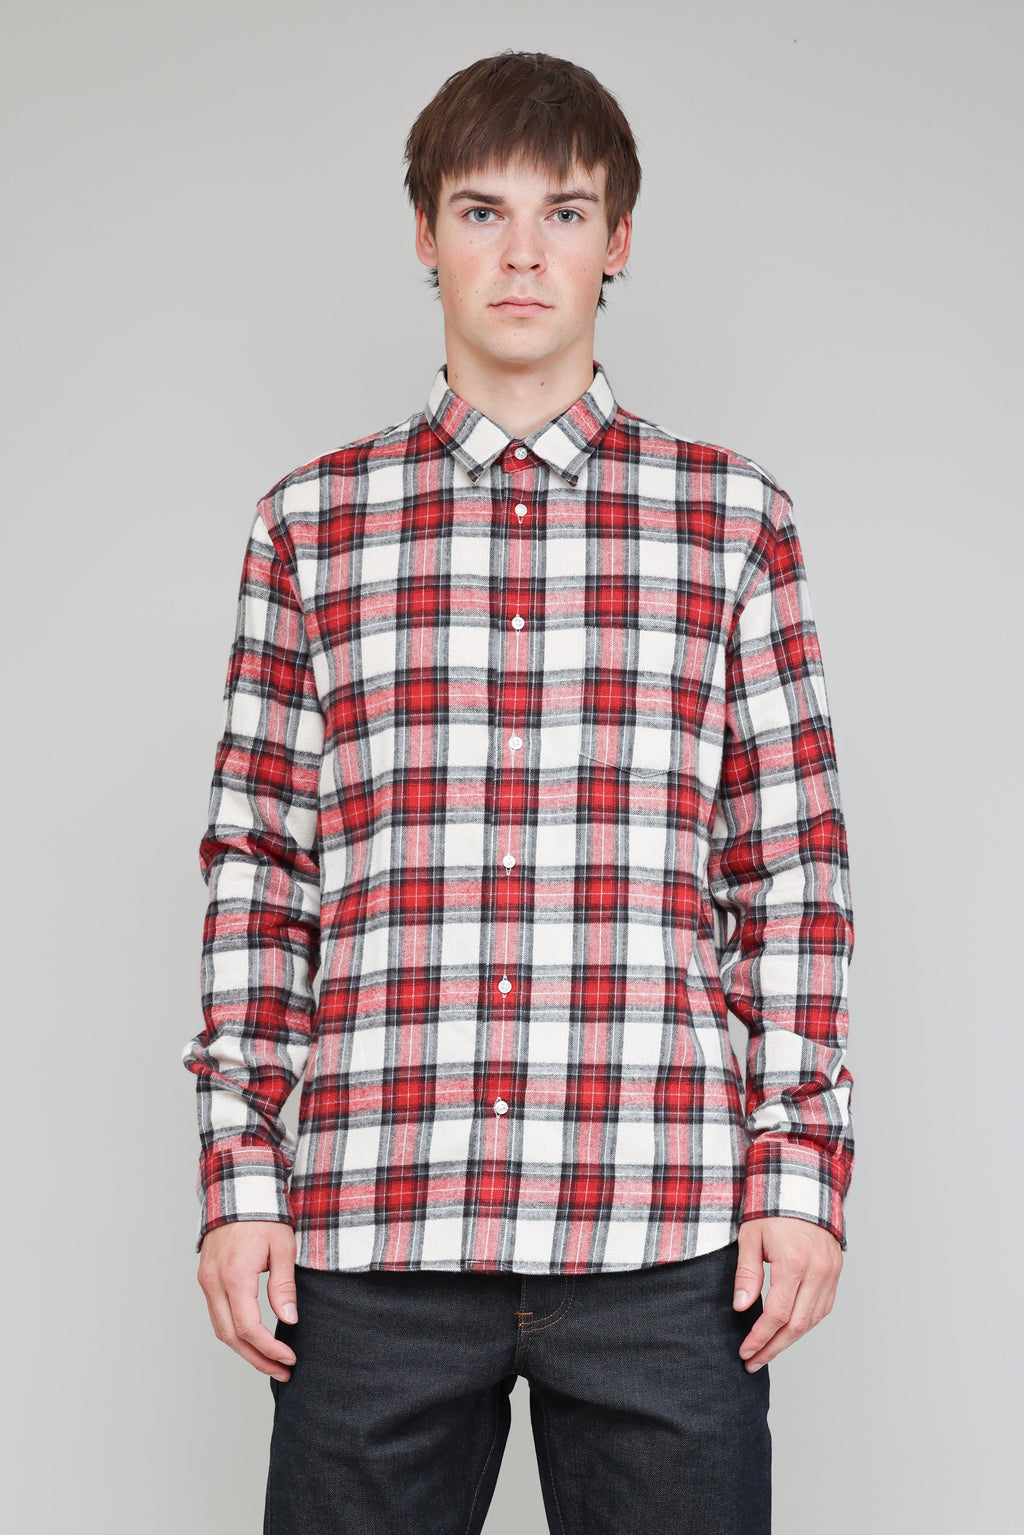 Japanese Shaggy Tartan in Red and Grey 01